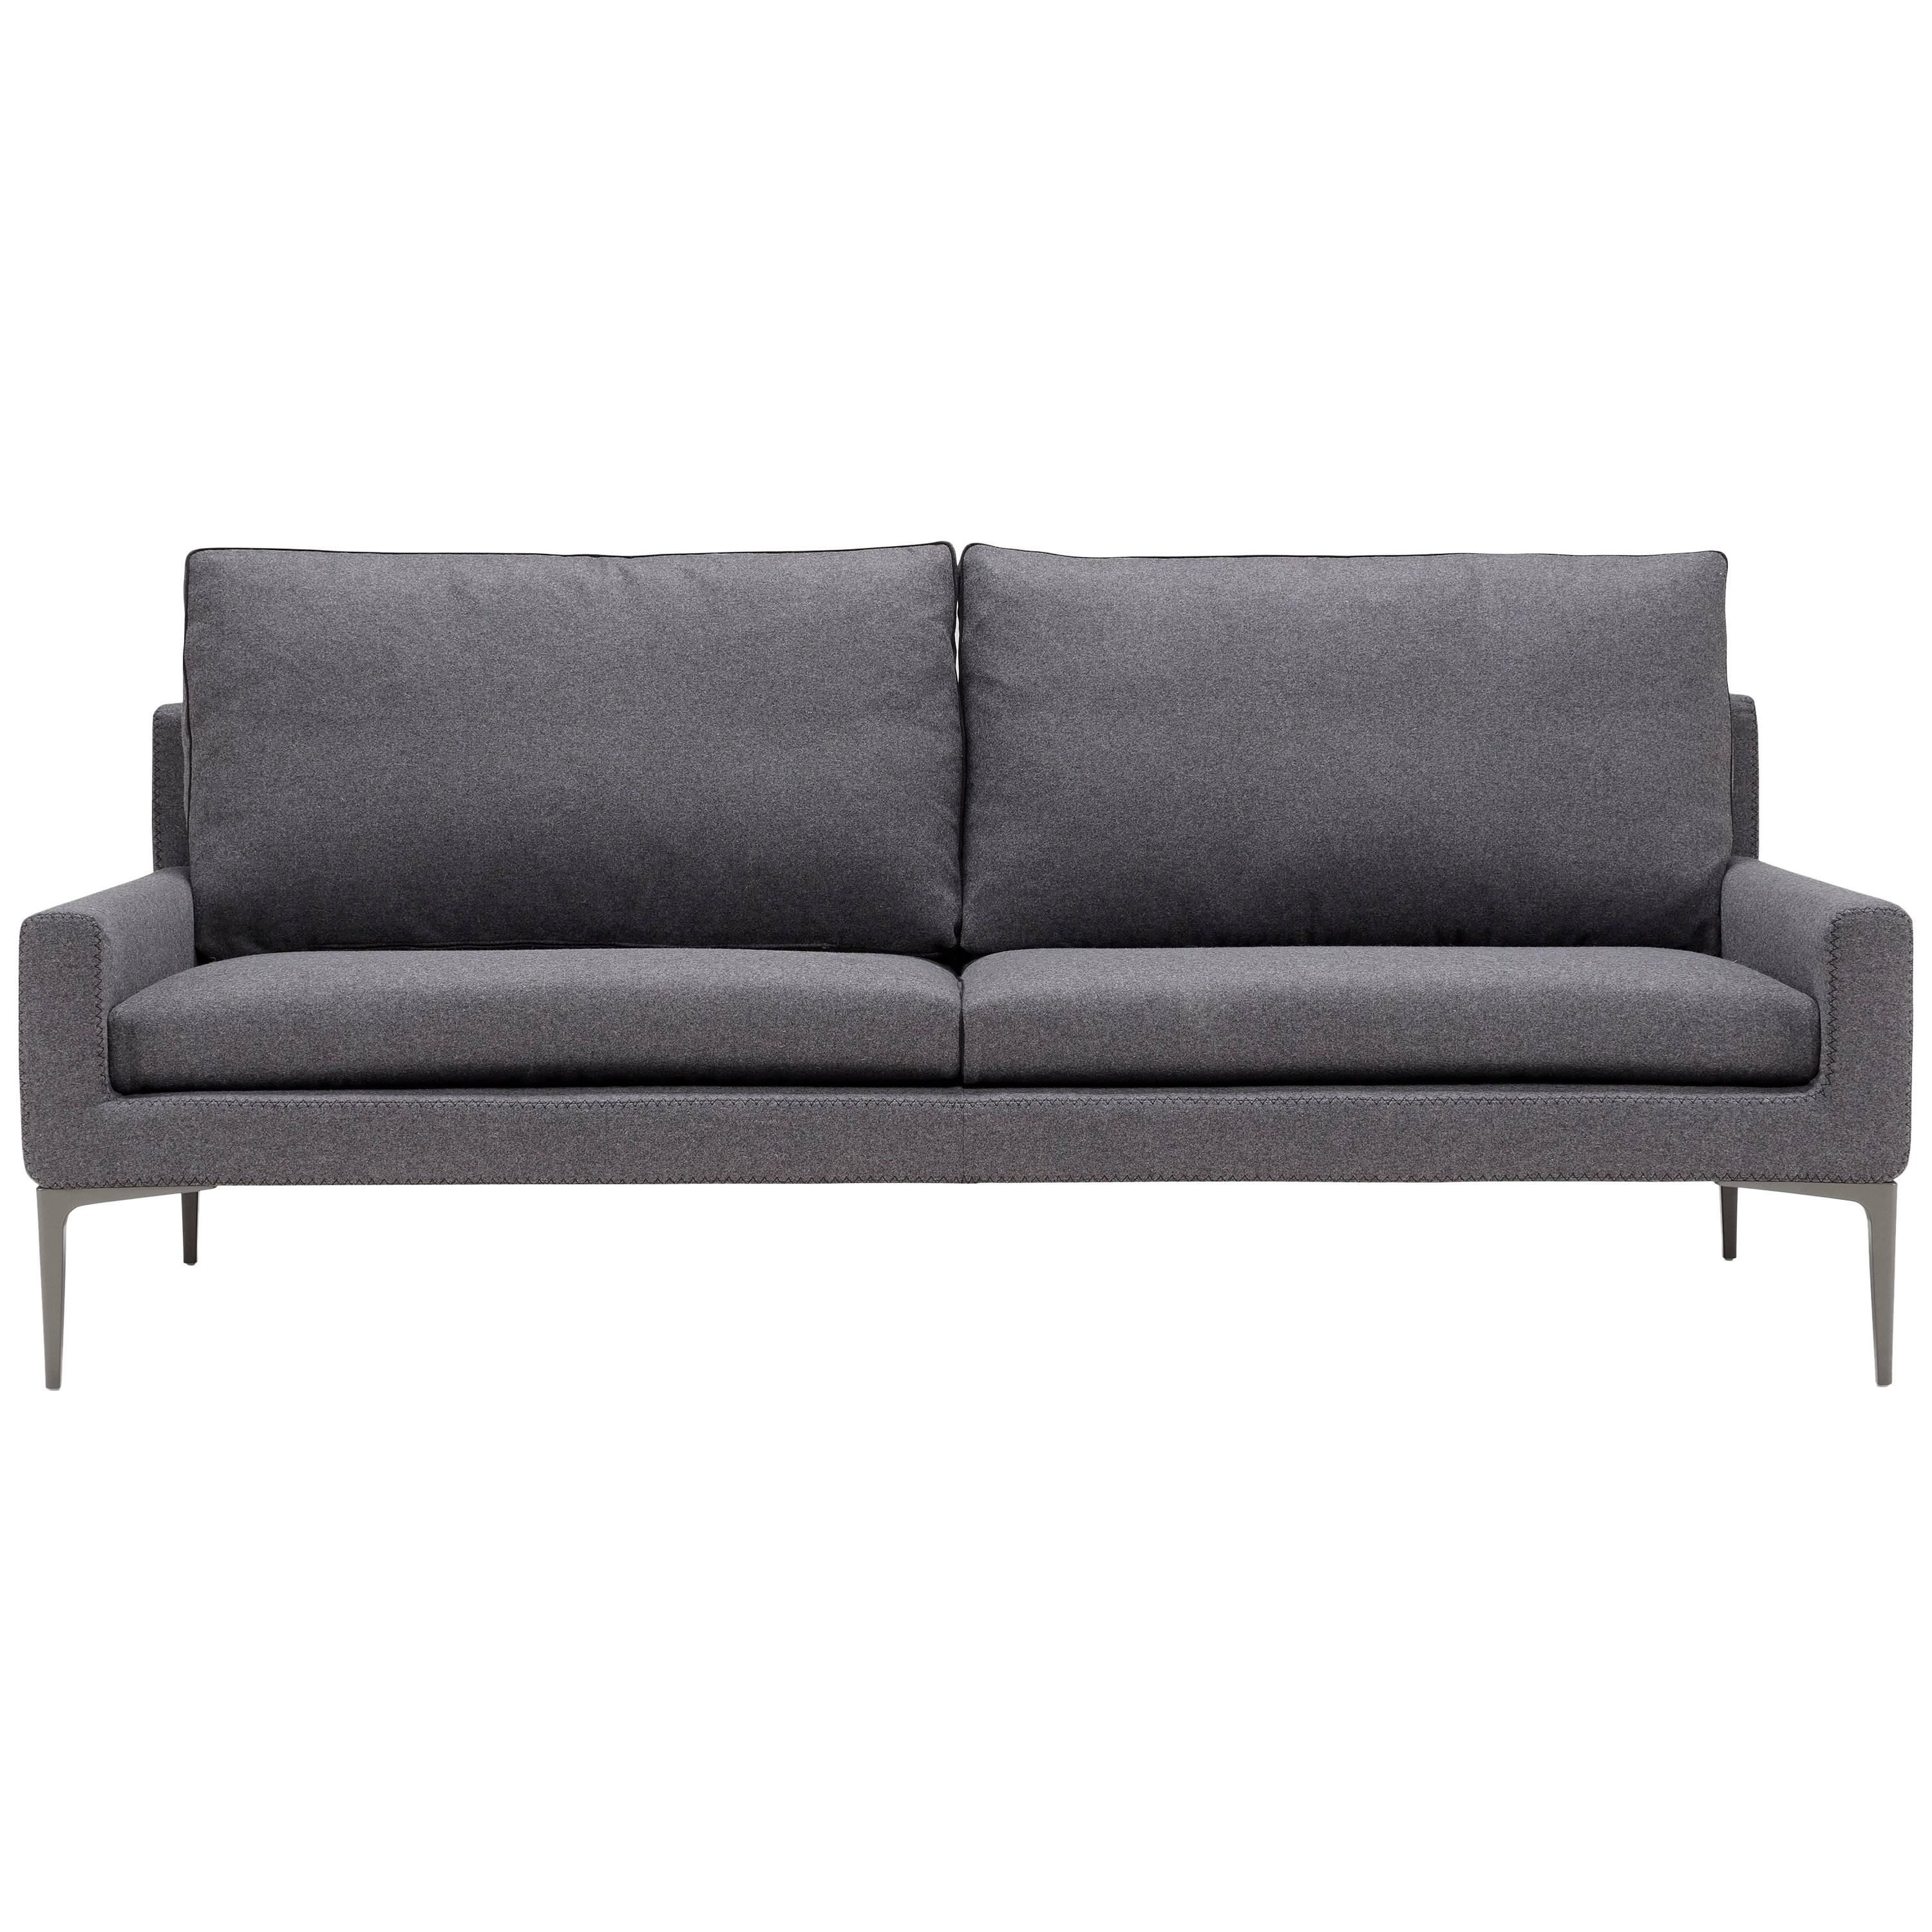 Elsa Sofa in Charcoal Gray by Luca Scacchetti For Sale